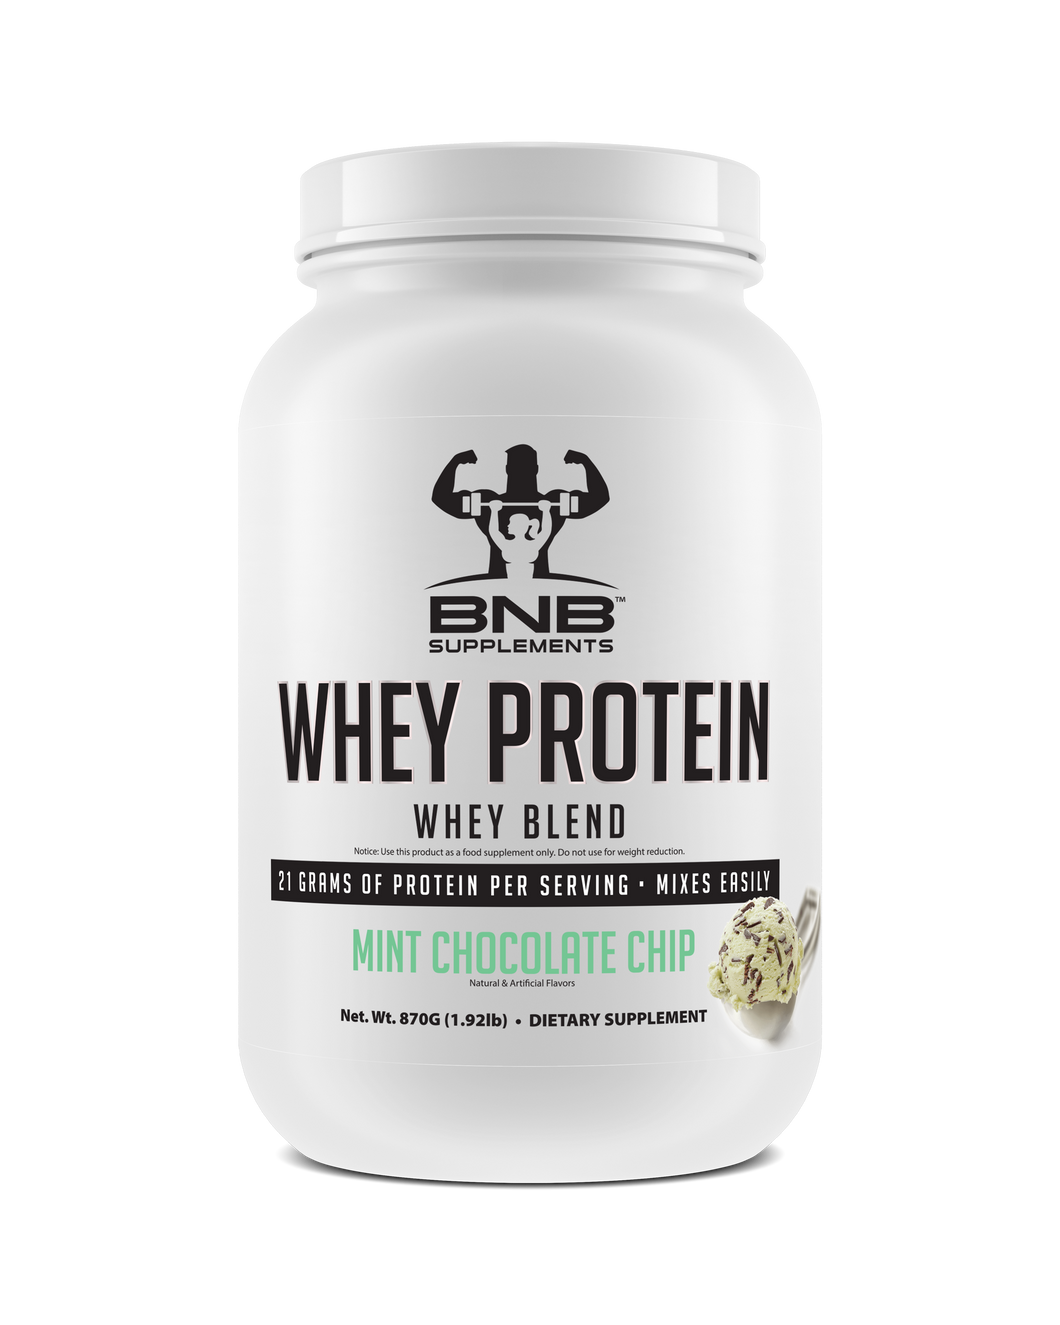 BNB Supplements Mint Chocolate Chip Whey Protein tastes like ice cream